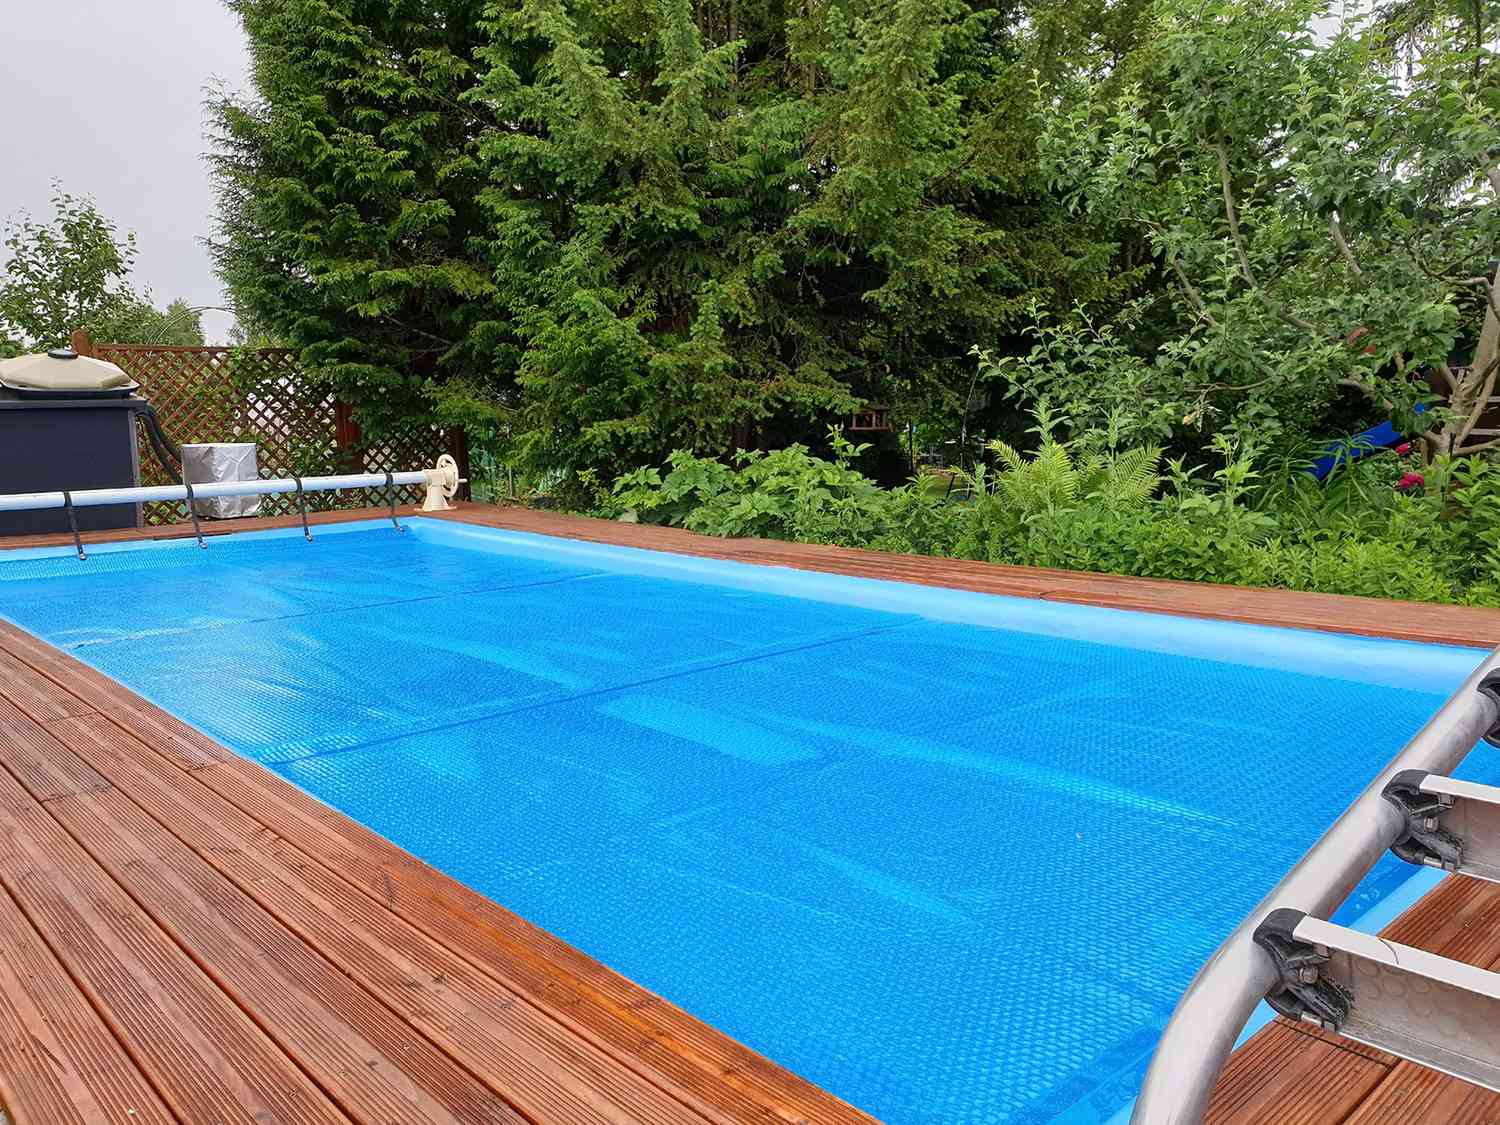 SERVICE - Automatic Pool Covers New England